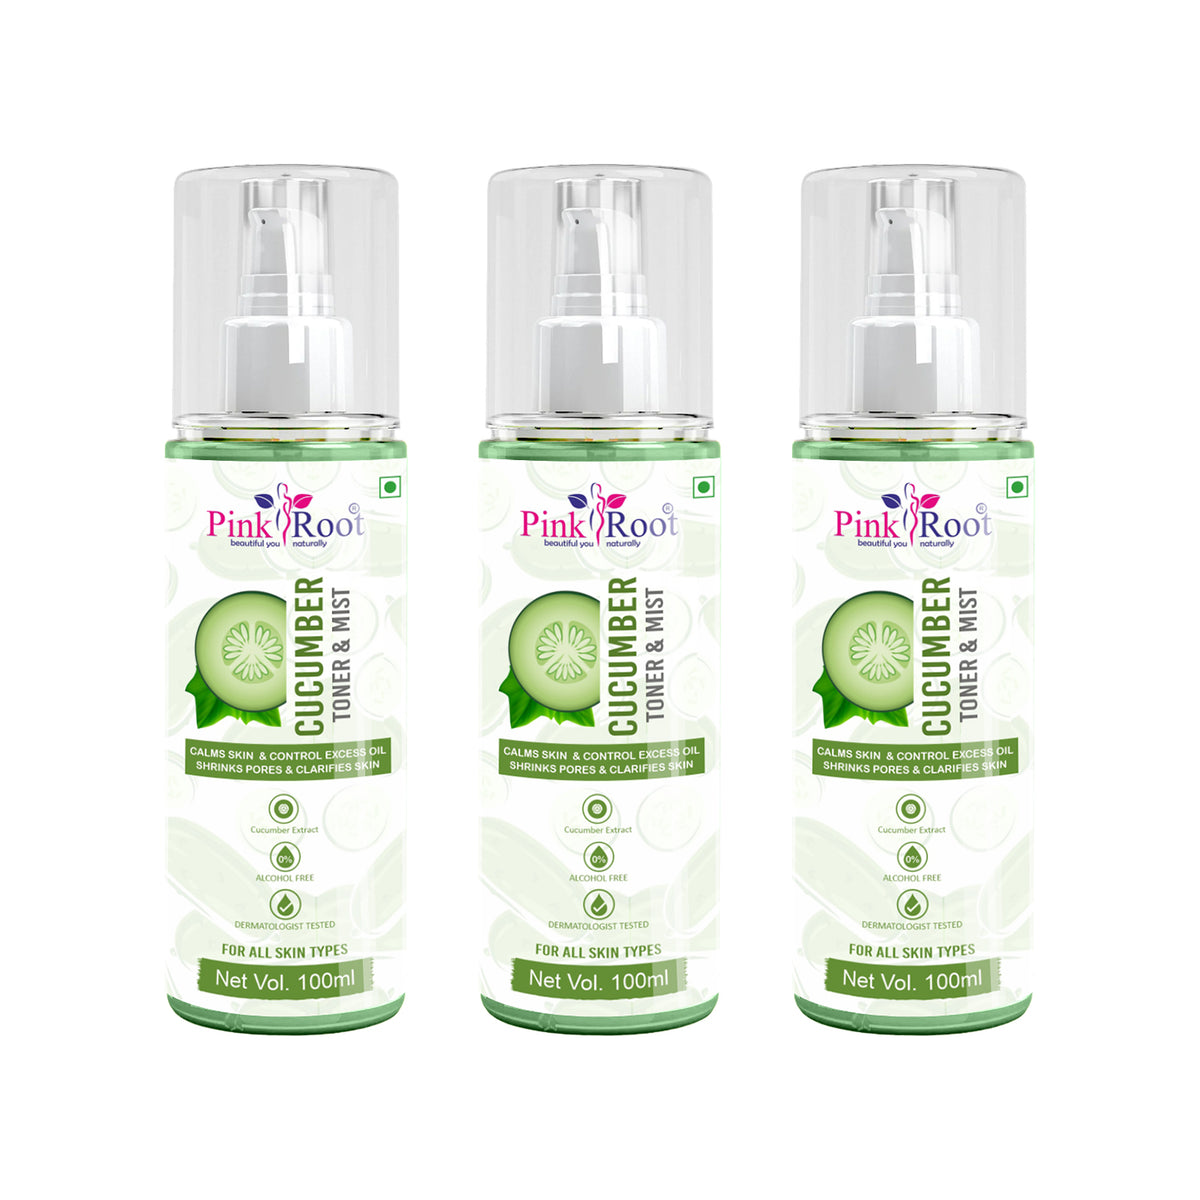 Pink Root Cucumber Toner & Mist 100ml, Hydrating Pore Tightening Moisturizing Revitalising Face Spray Toner for All Skin Types, Natural, No Alcohol, Parabens & Sulphates (Pack of 3)